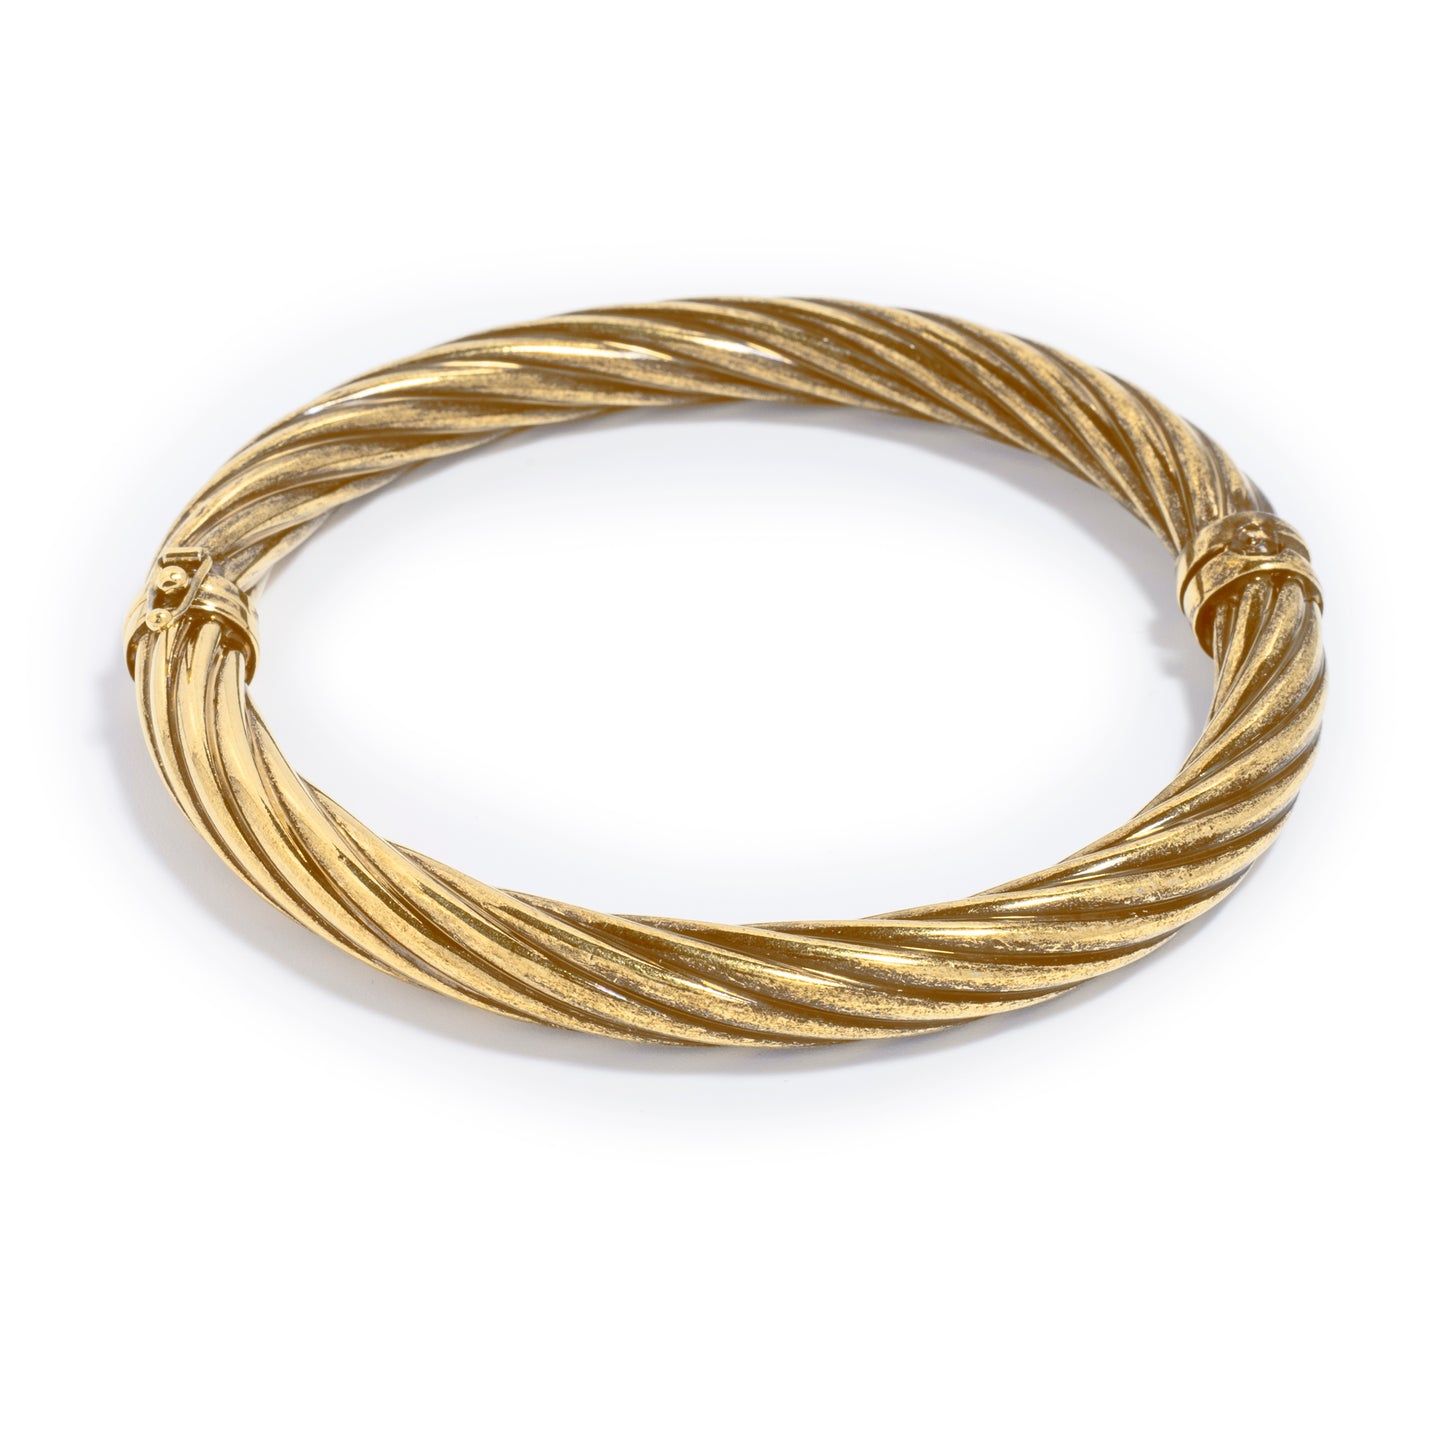 7.25" Antique Yellow Gold Twisted Oval Bangle